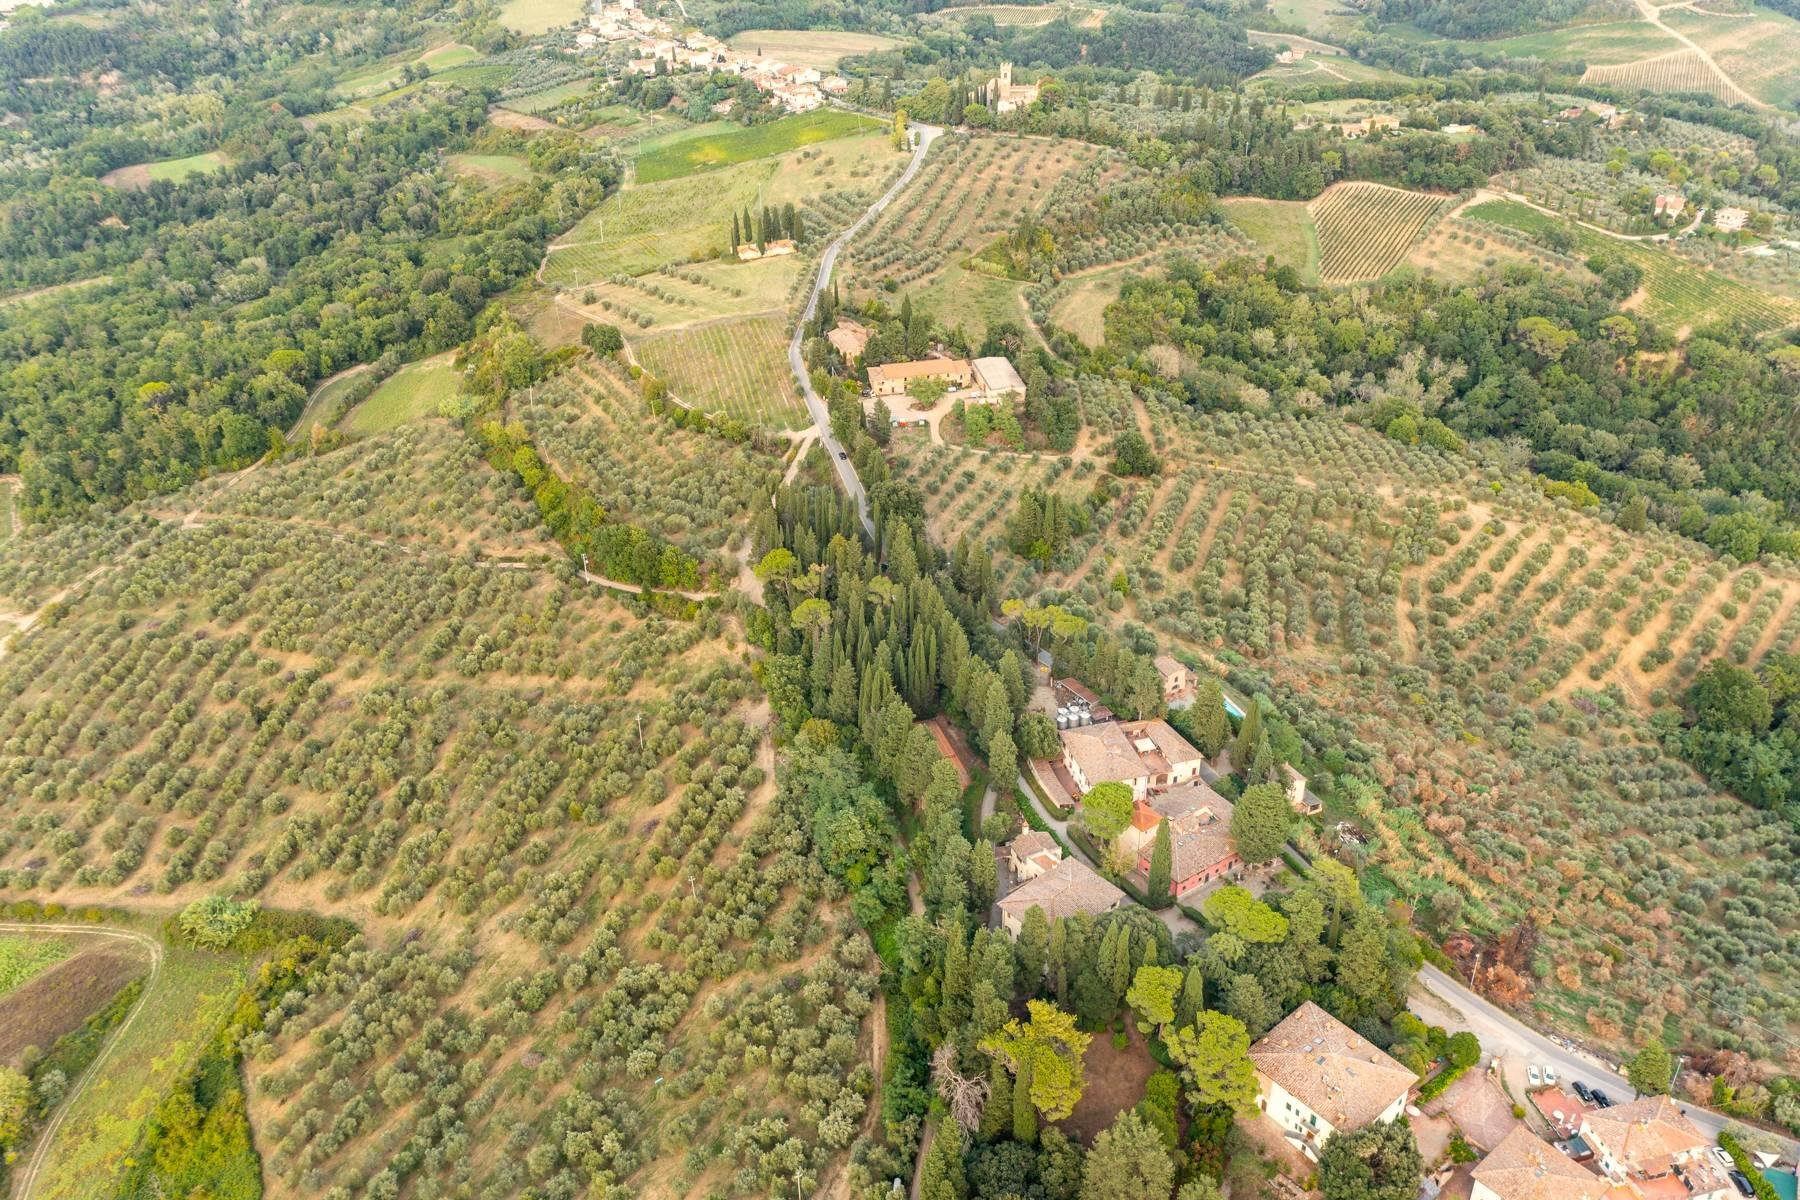 Francis York Italy Sothebys 741 Acre Tuscan Estate With 148 Acres of DOCG Vineyards 28.jpg